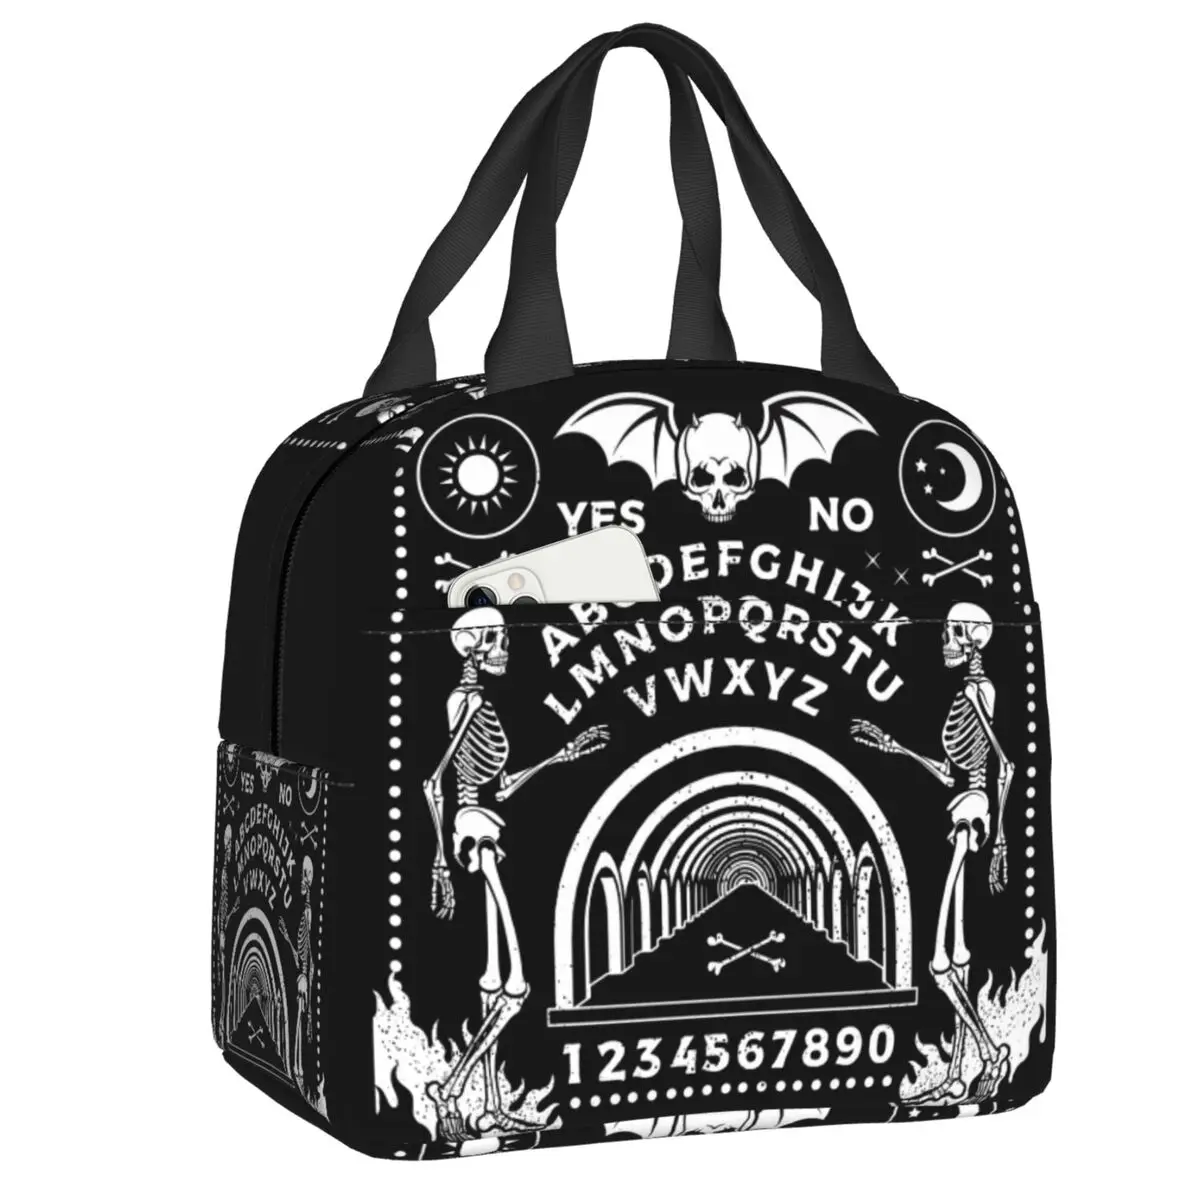 

Ouija Board With Skeletons Occultism Insulated Lunch Bag for Women Halloween Thermal Cooler Bento Box Office Picnic Travel